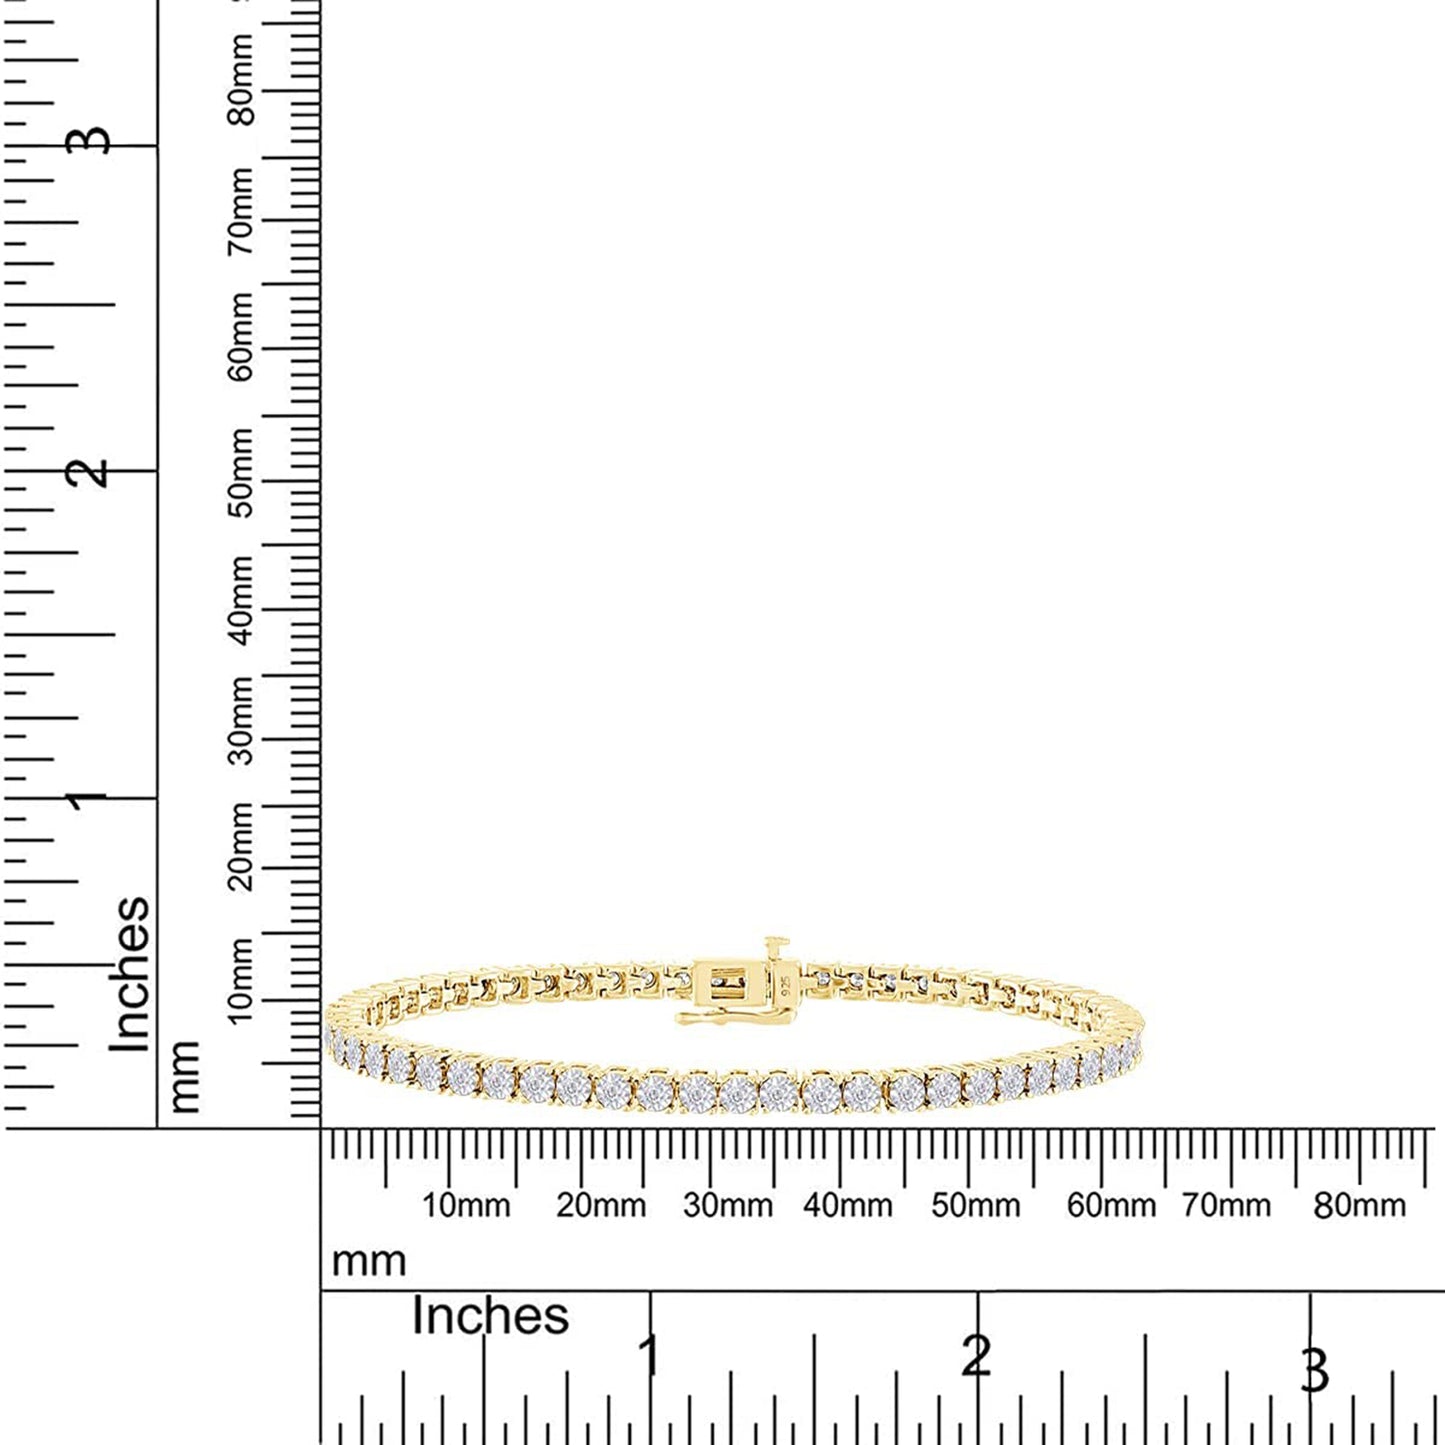 1 Carat Round Natural White Diamond Miracle Set Tennis Bracelet For Women In 925 Sterling Silver